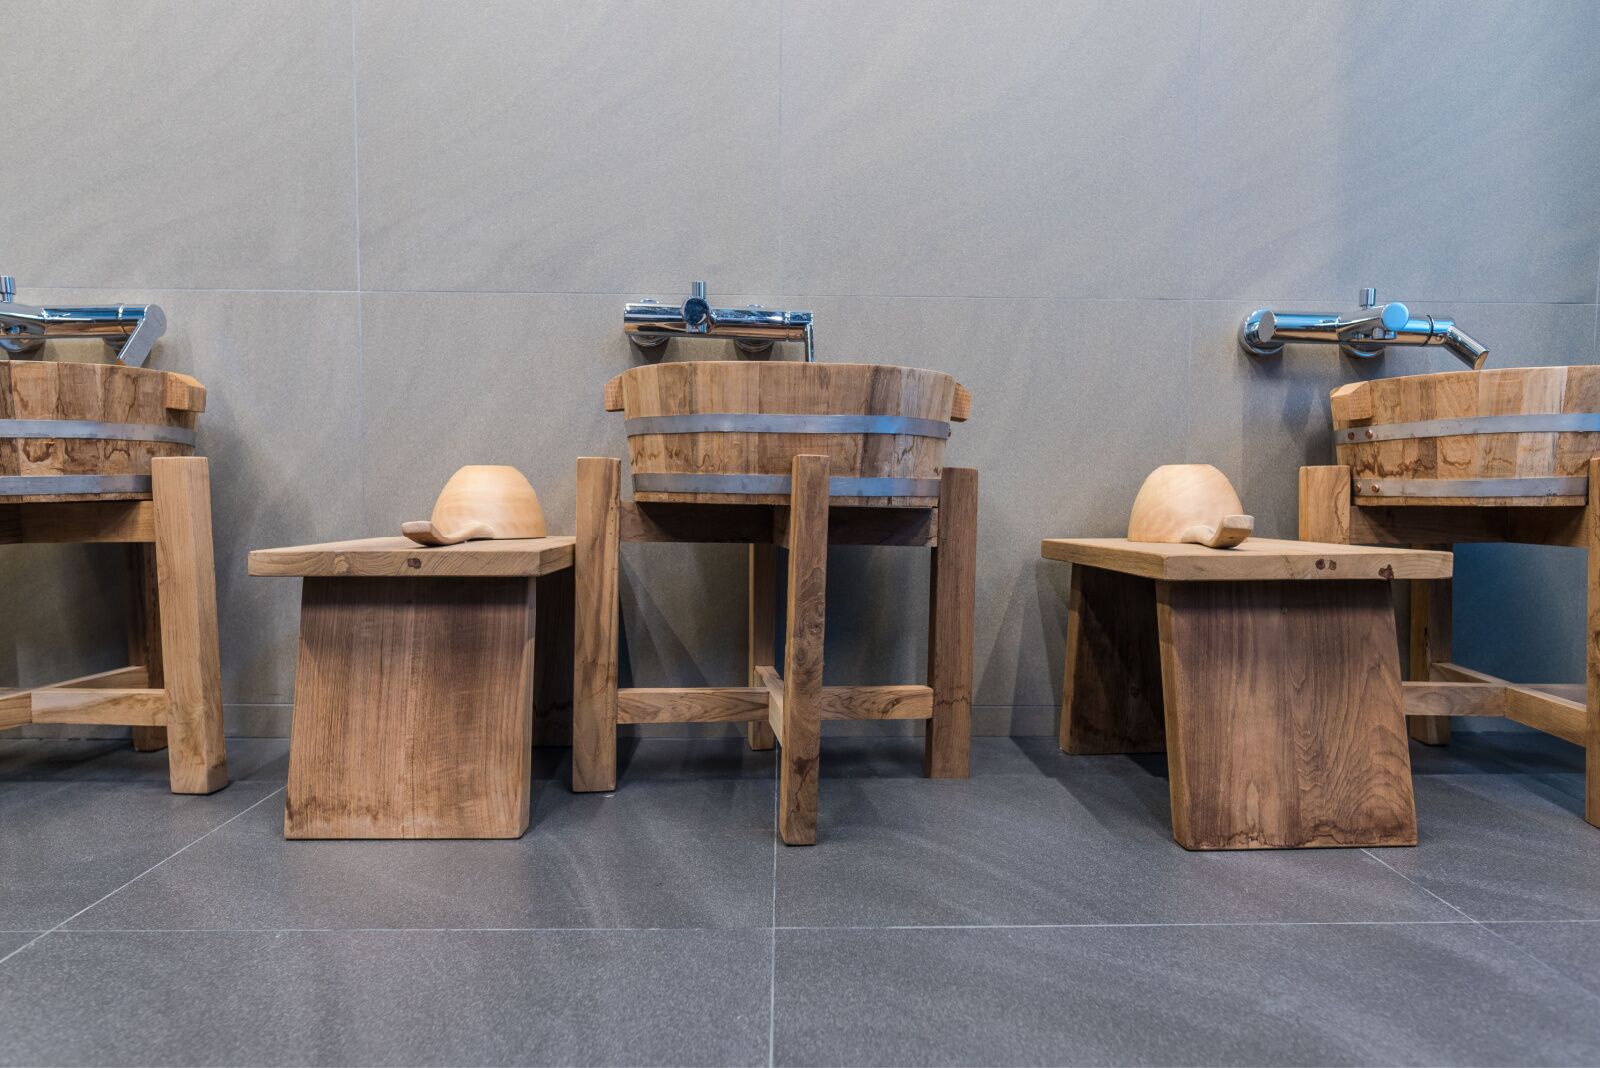 Rows of wooden stools at a Japanese onsen 